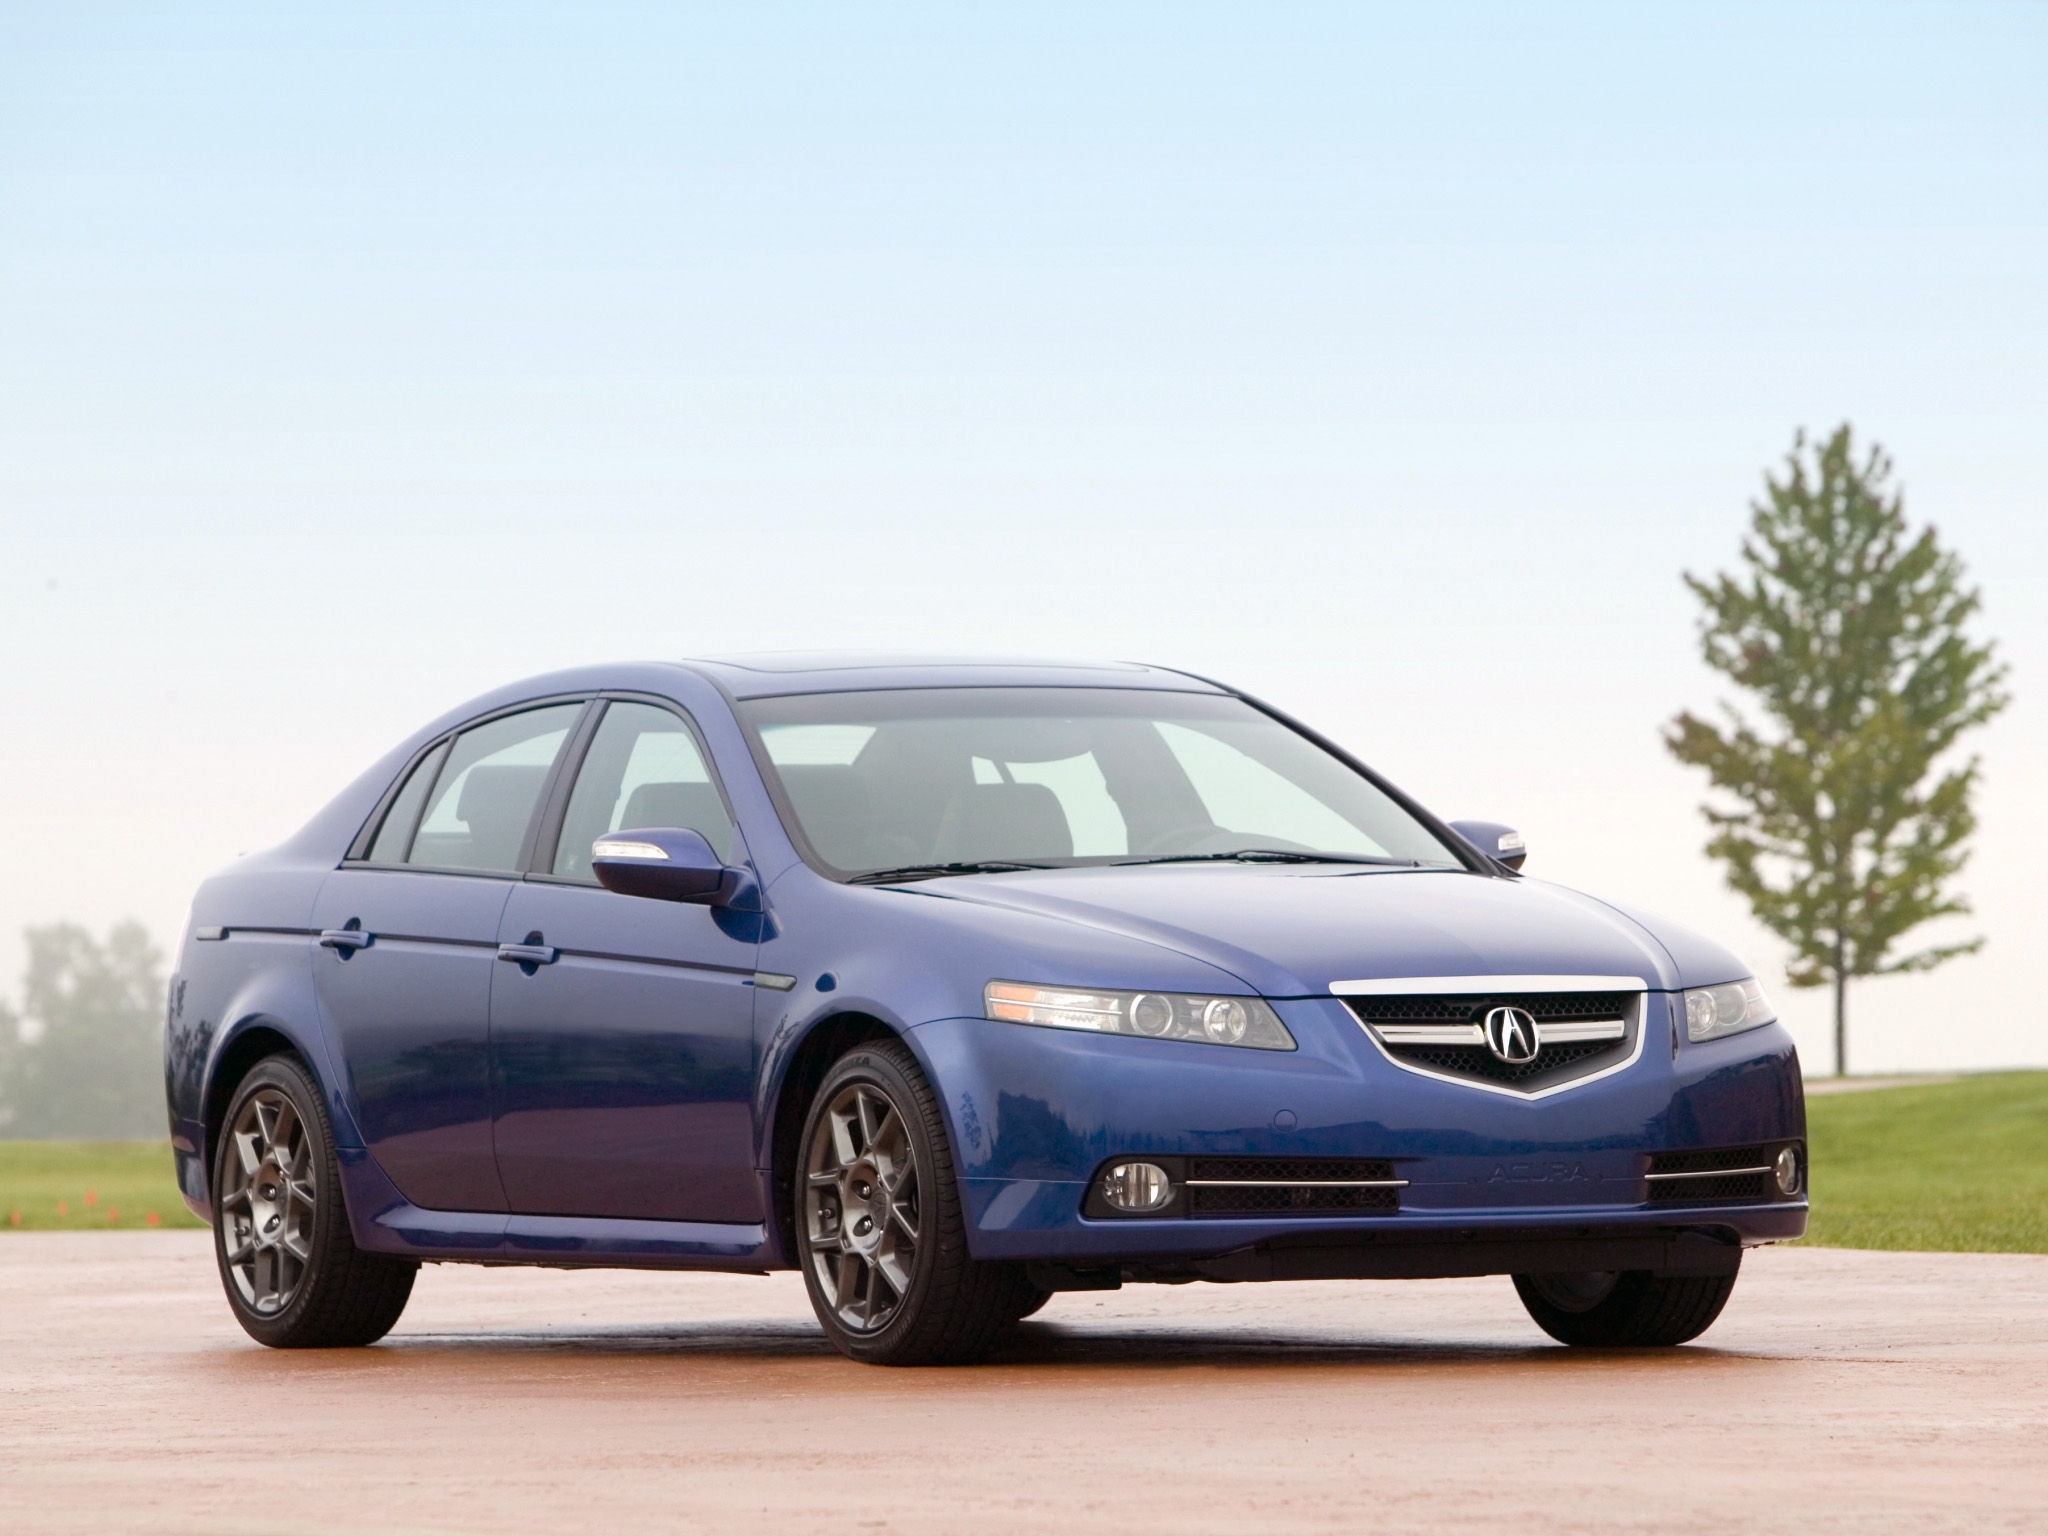 wallpapers auto, nature, grass, sky, acura, cars, blue, wood, tree, side view, style, akura, tl, 2007